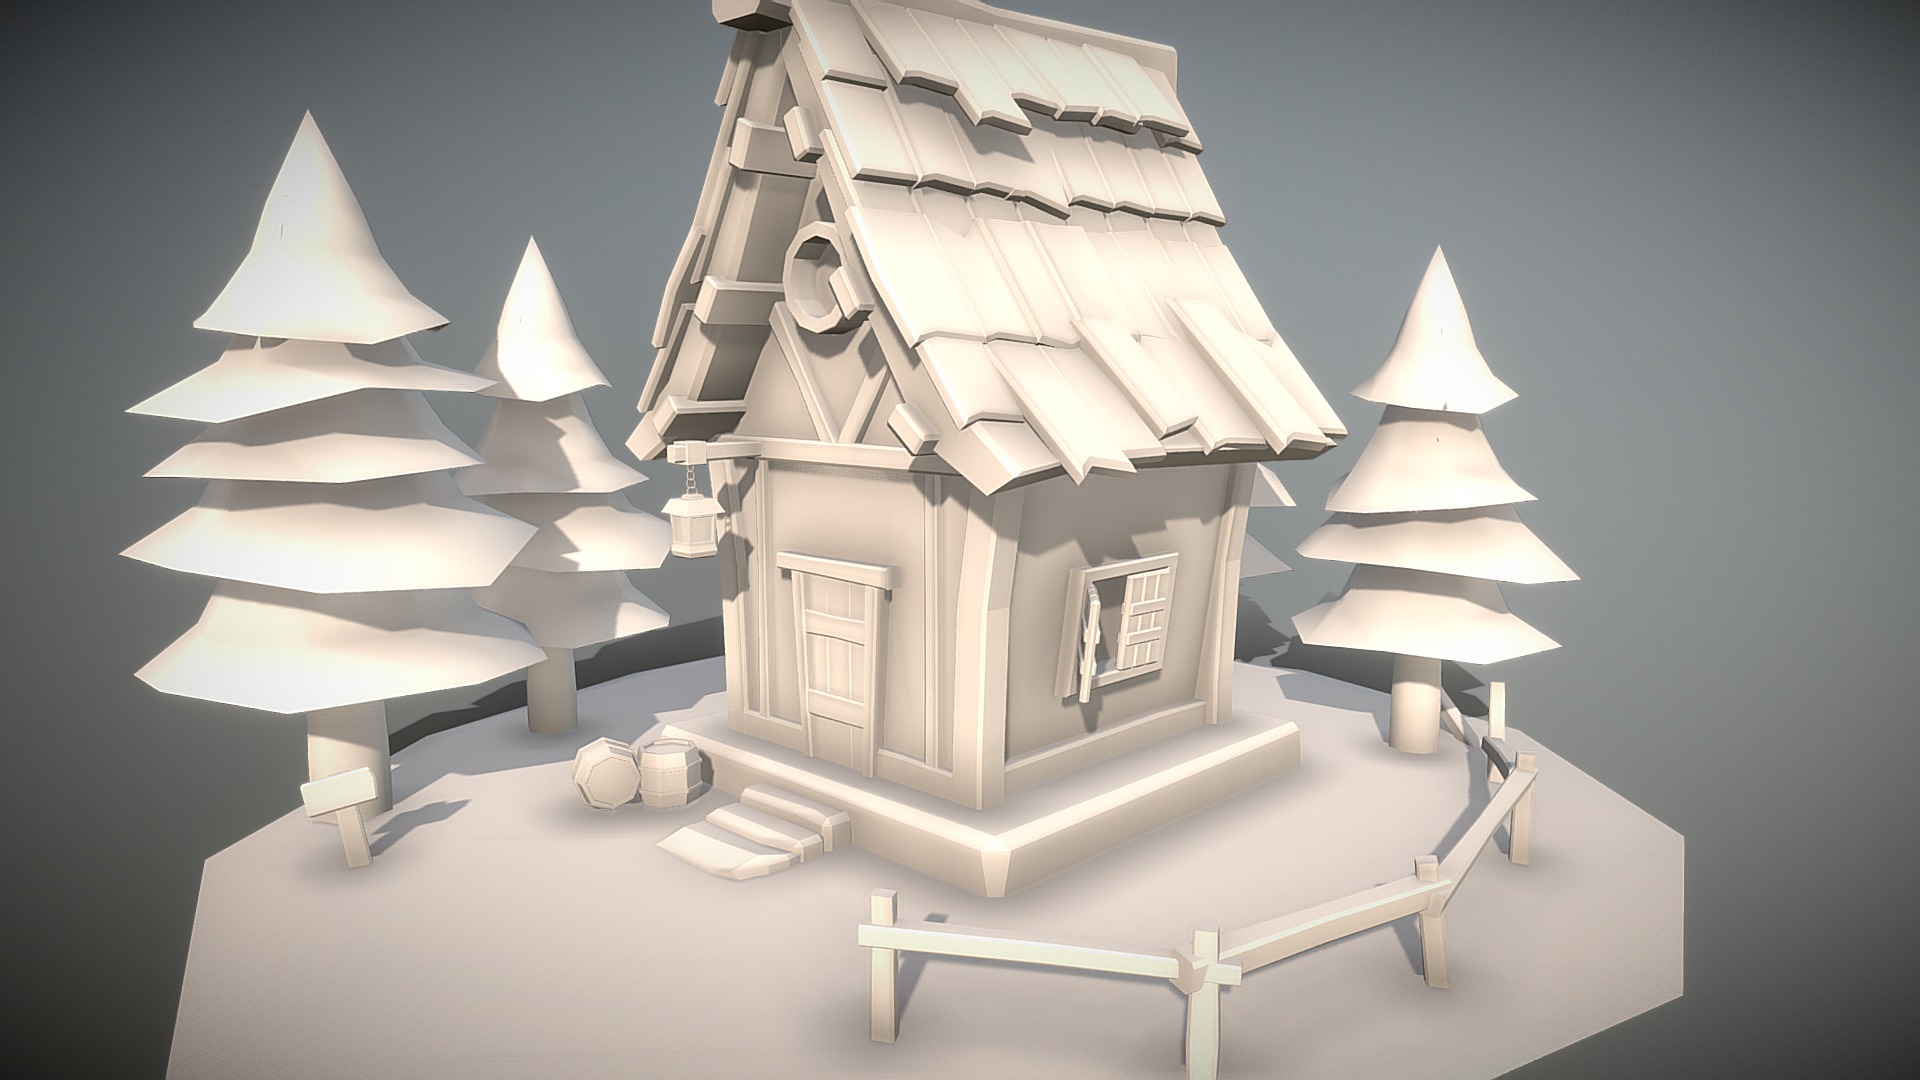 3D model Cabin In The Woods for Tiny Cabin Challenge - This is a 3D model of the Cabin In The Woods for Tiny Cabin Challenge. The 3D model is about a house with a white roof.